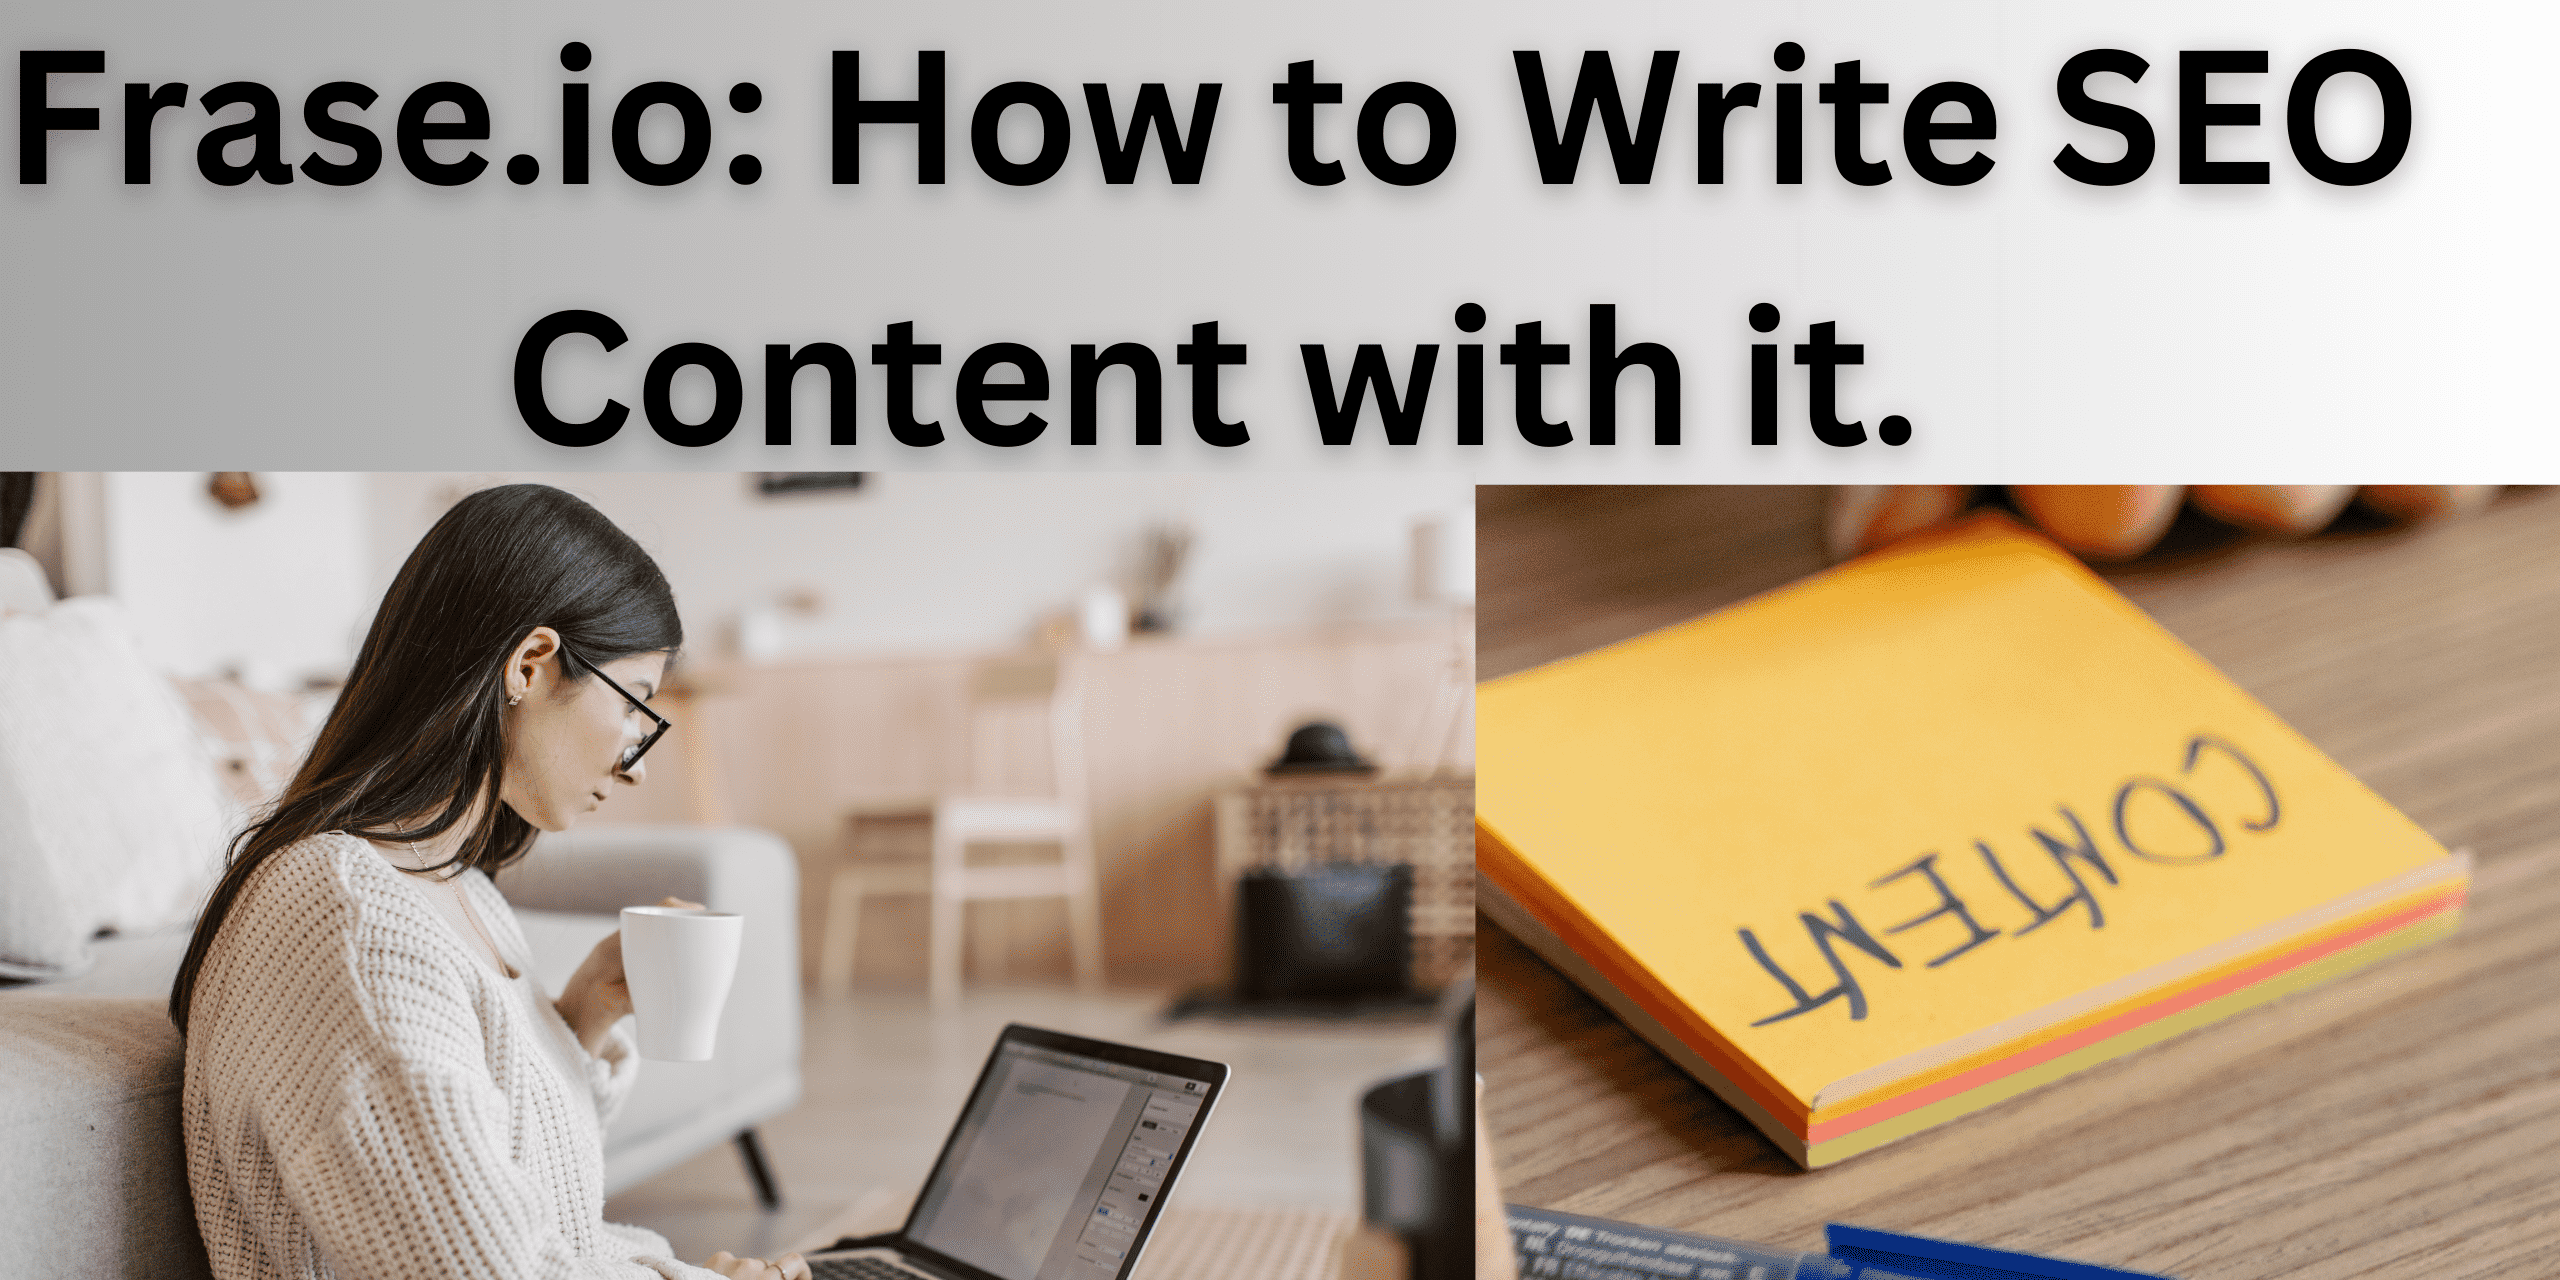 alt="Frase.io How to Write SEO Content with it"